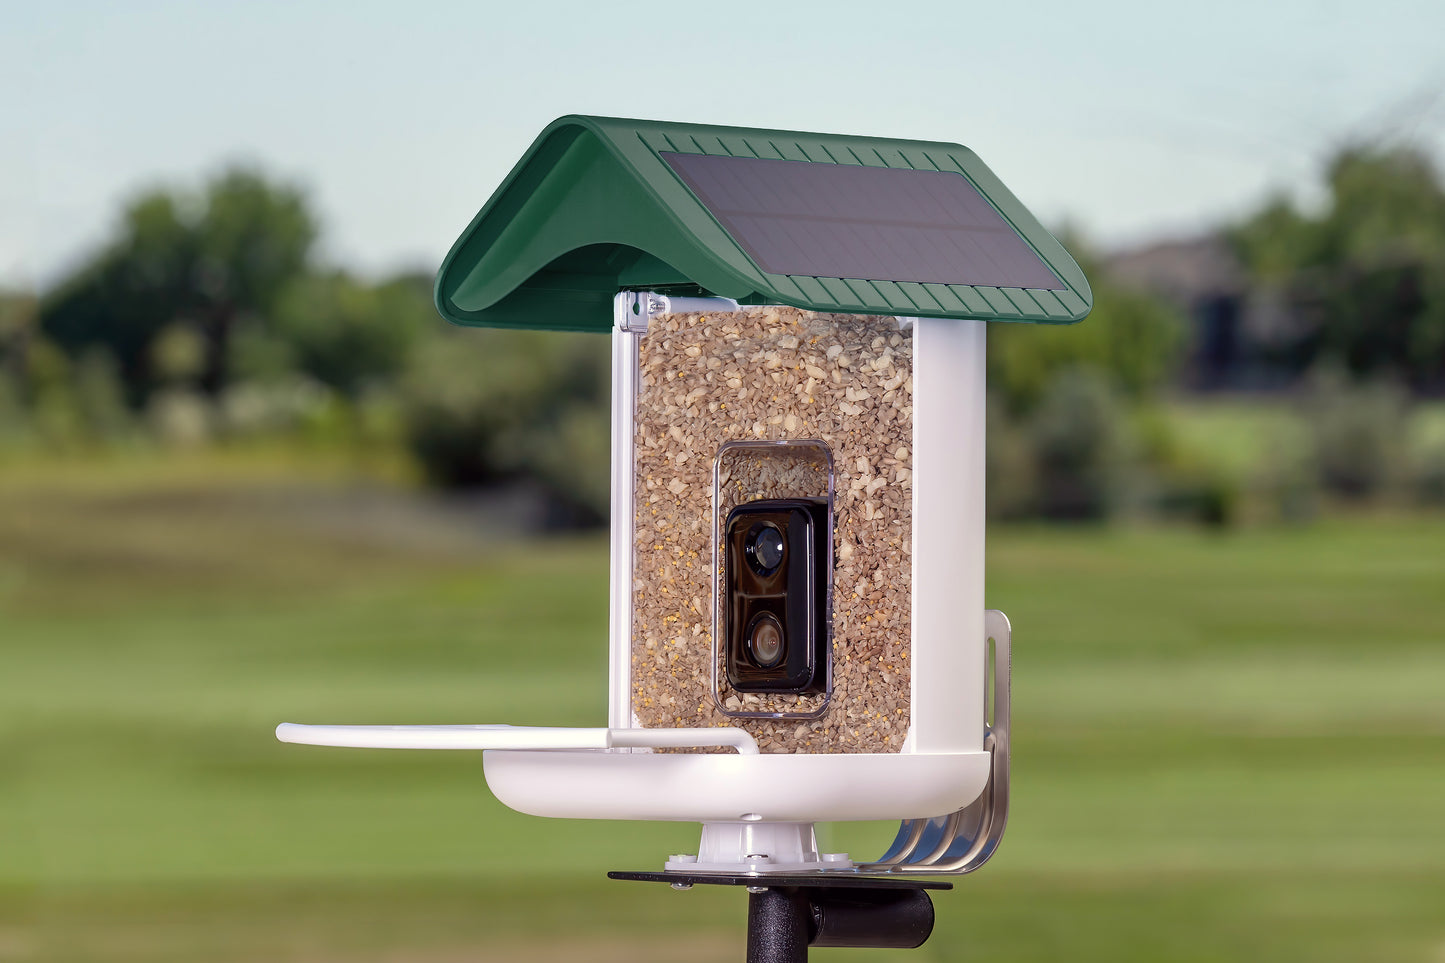 BirdReel Smart Bird Feeder - Now Available at more than 140 Wild Birds Unlimited stores around the country or on-line at order.wbu.com!